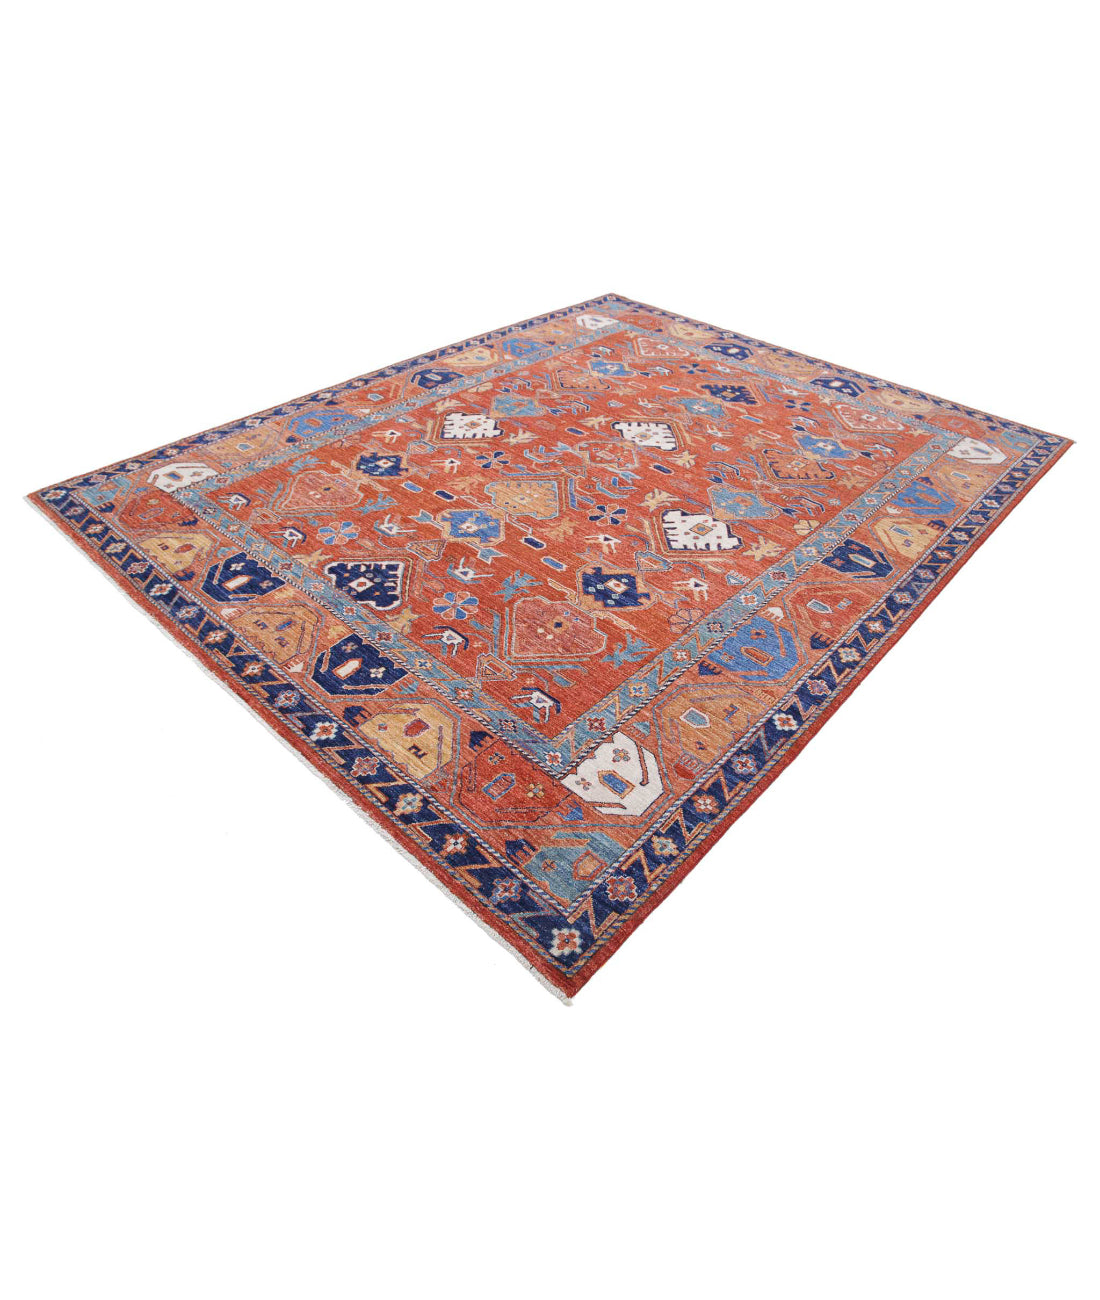 Hand Knotted Nomadic Caucasian Humna Wool Rug - 8'0'' x 10'0'' 8'0'' x 10'0'' (240 X 300) / Rust / Blue